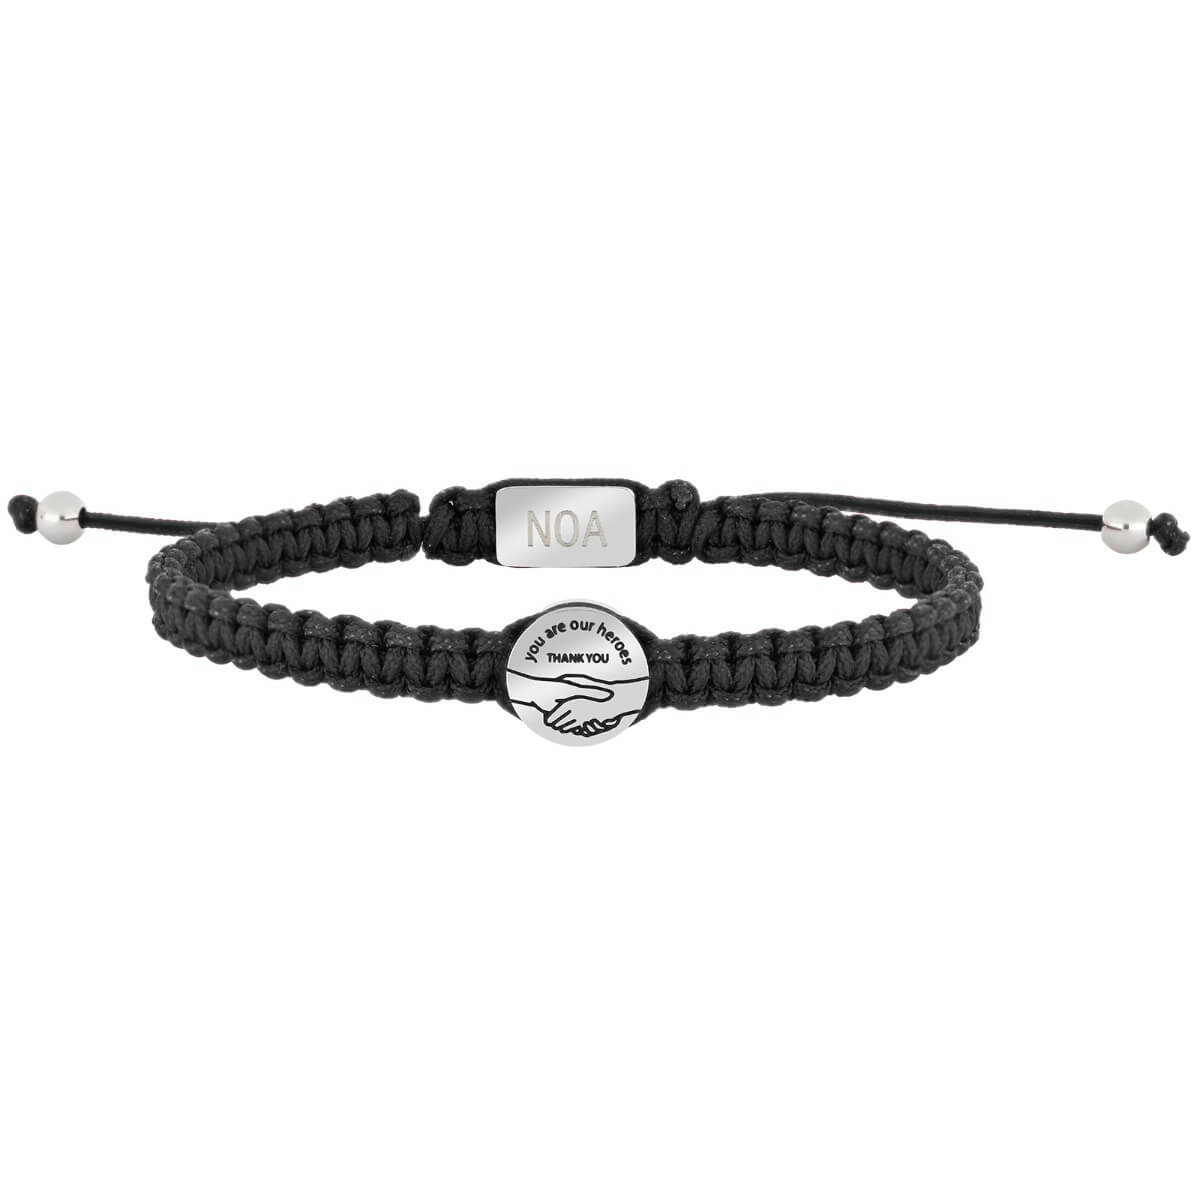 sonofnoa you are our heroes black bracelet 15 21cm 892 012